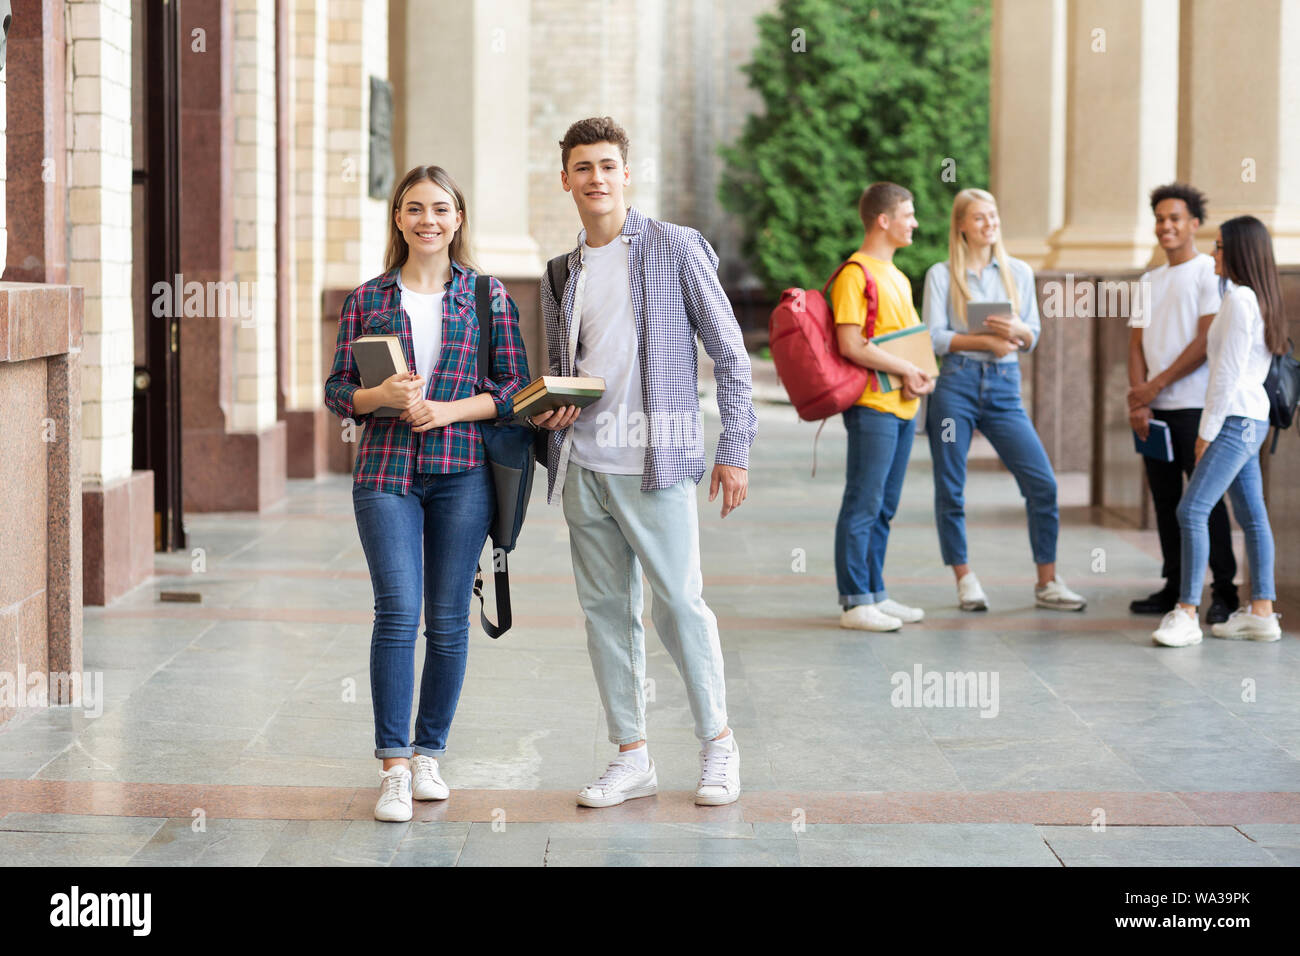 Happy students in university campus smiling to camera Stock Photo